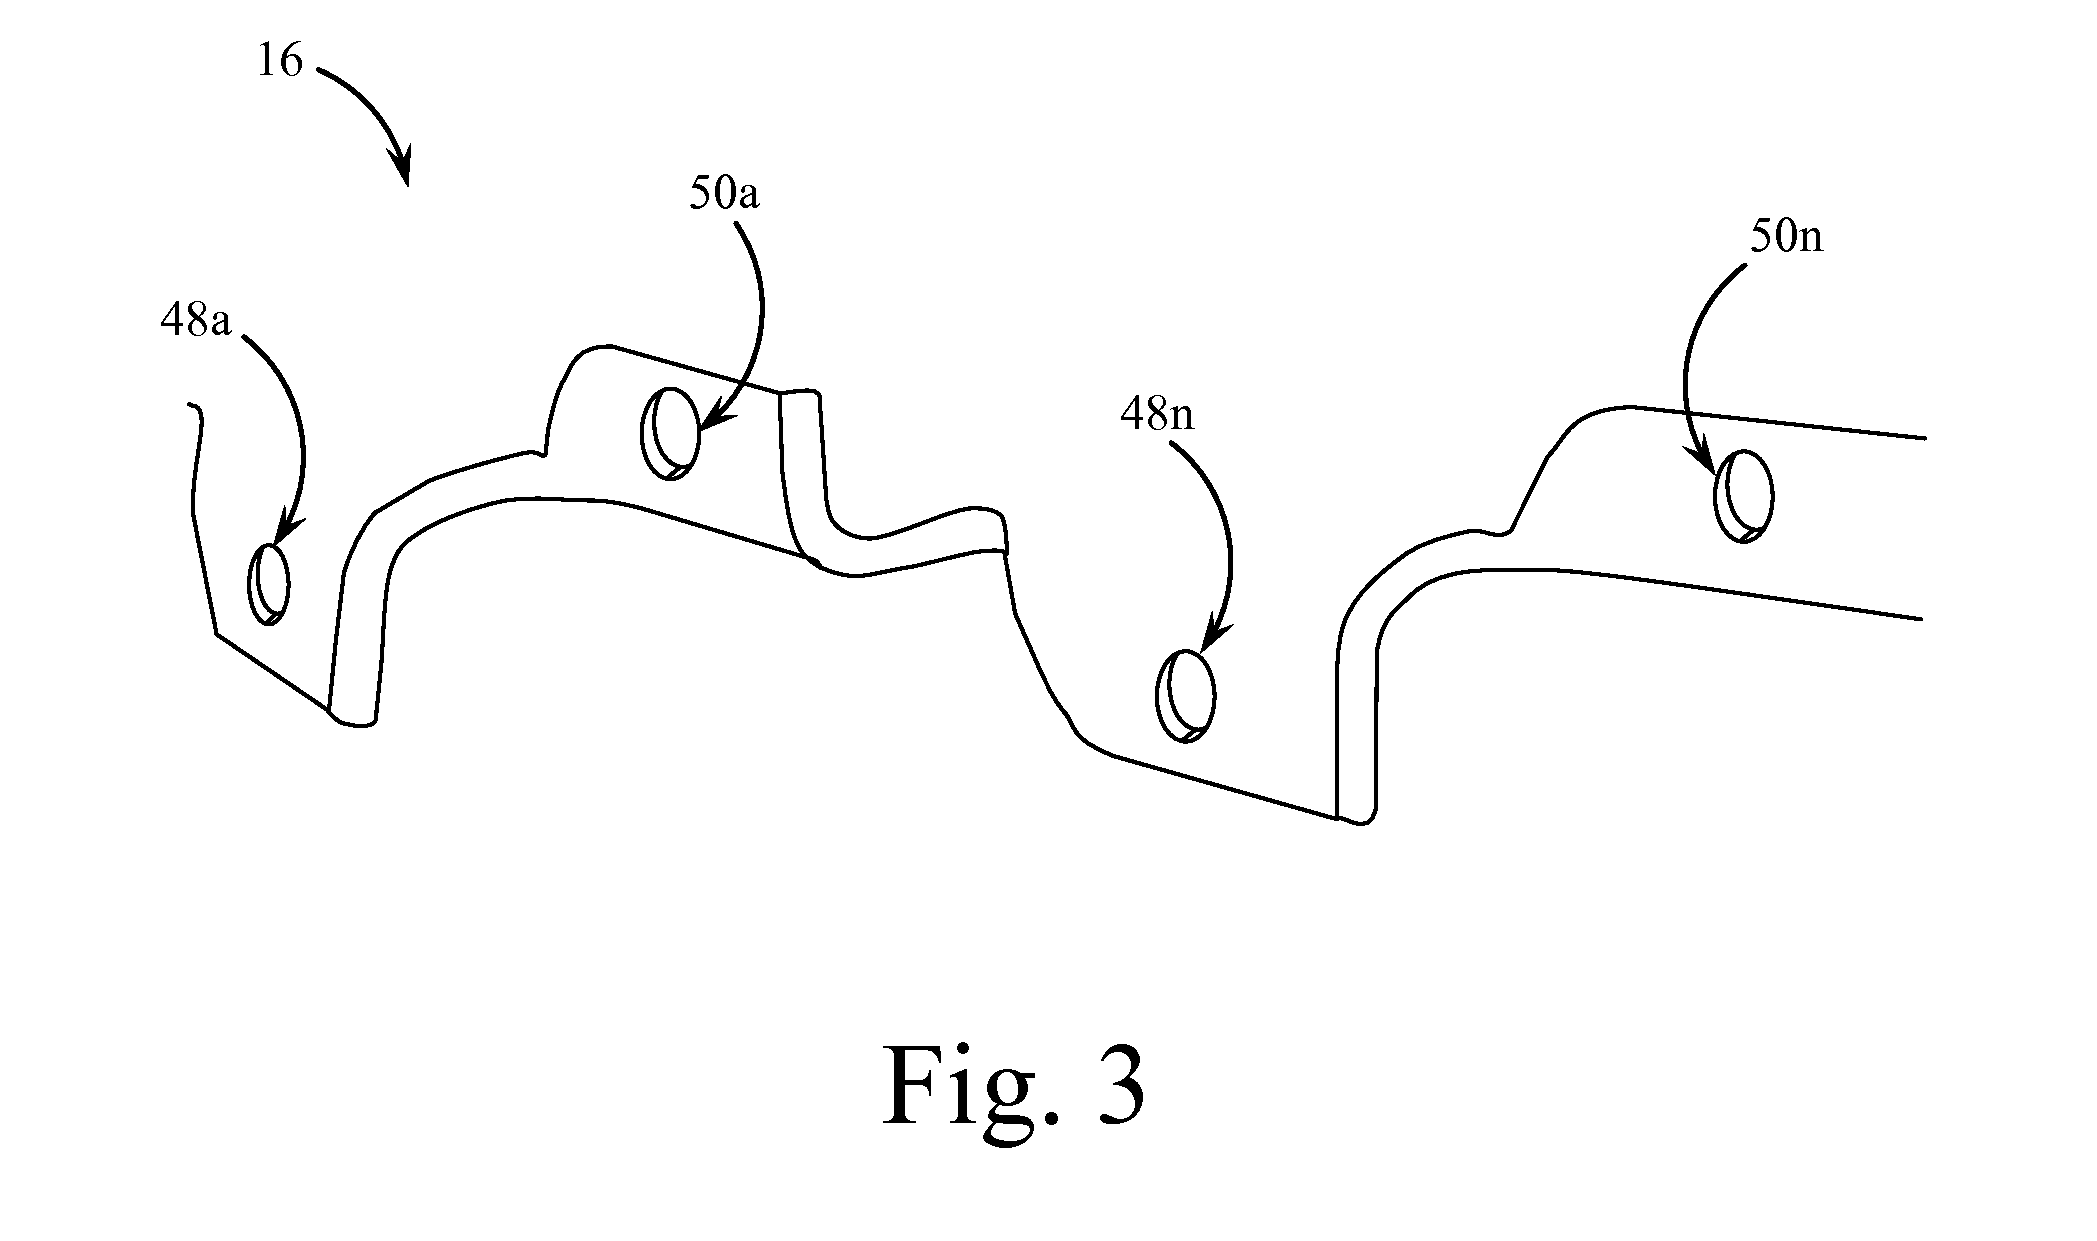 Method for Manufacturing a Gelled Fuel Heat Source